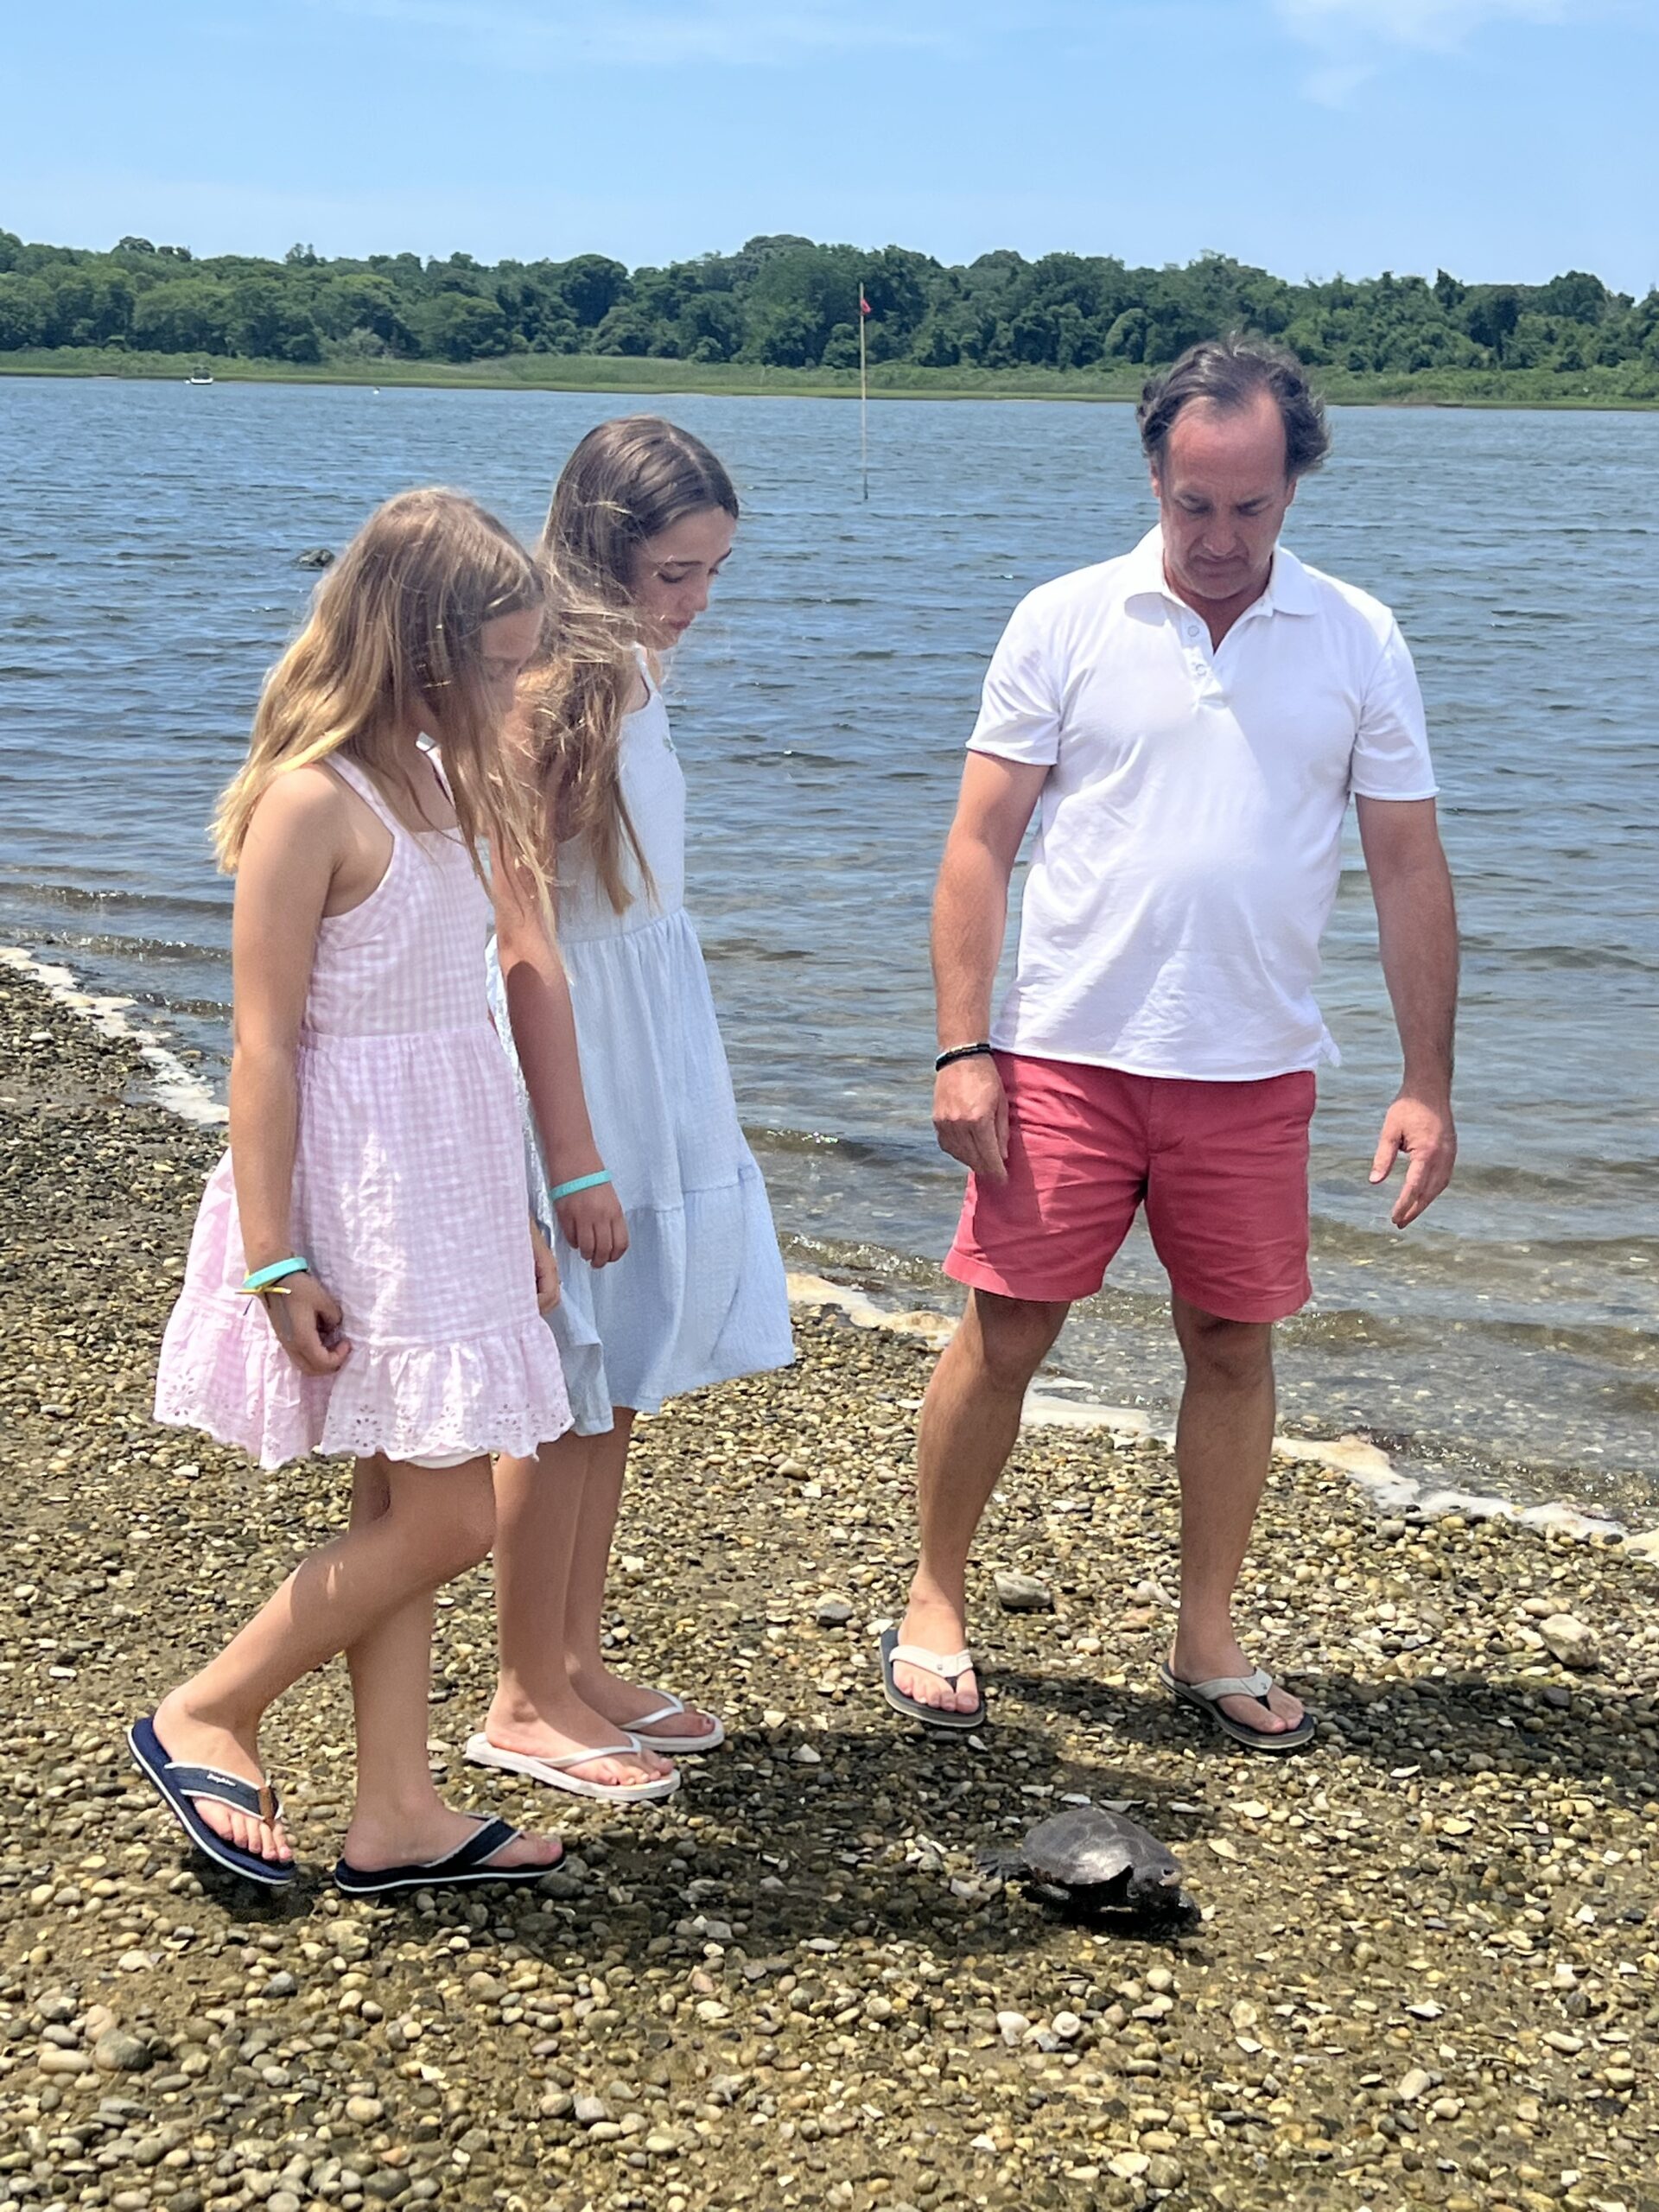 COURTESY JOHN WOBENSMITH Gracie (left), Ella (middle) and John Wobensmith (left) follow Lilly the turtle into the water during her release.